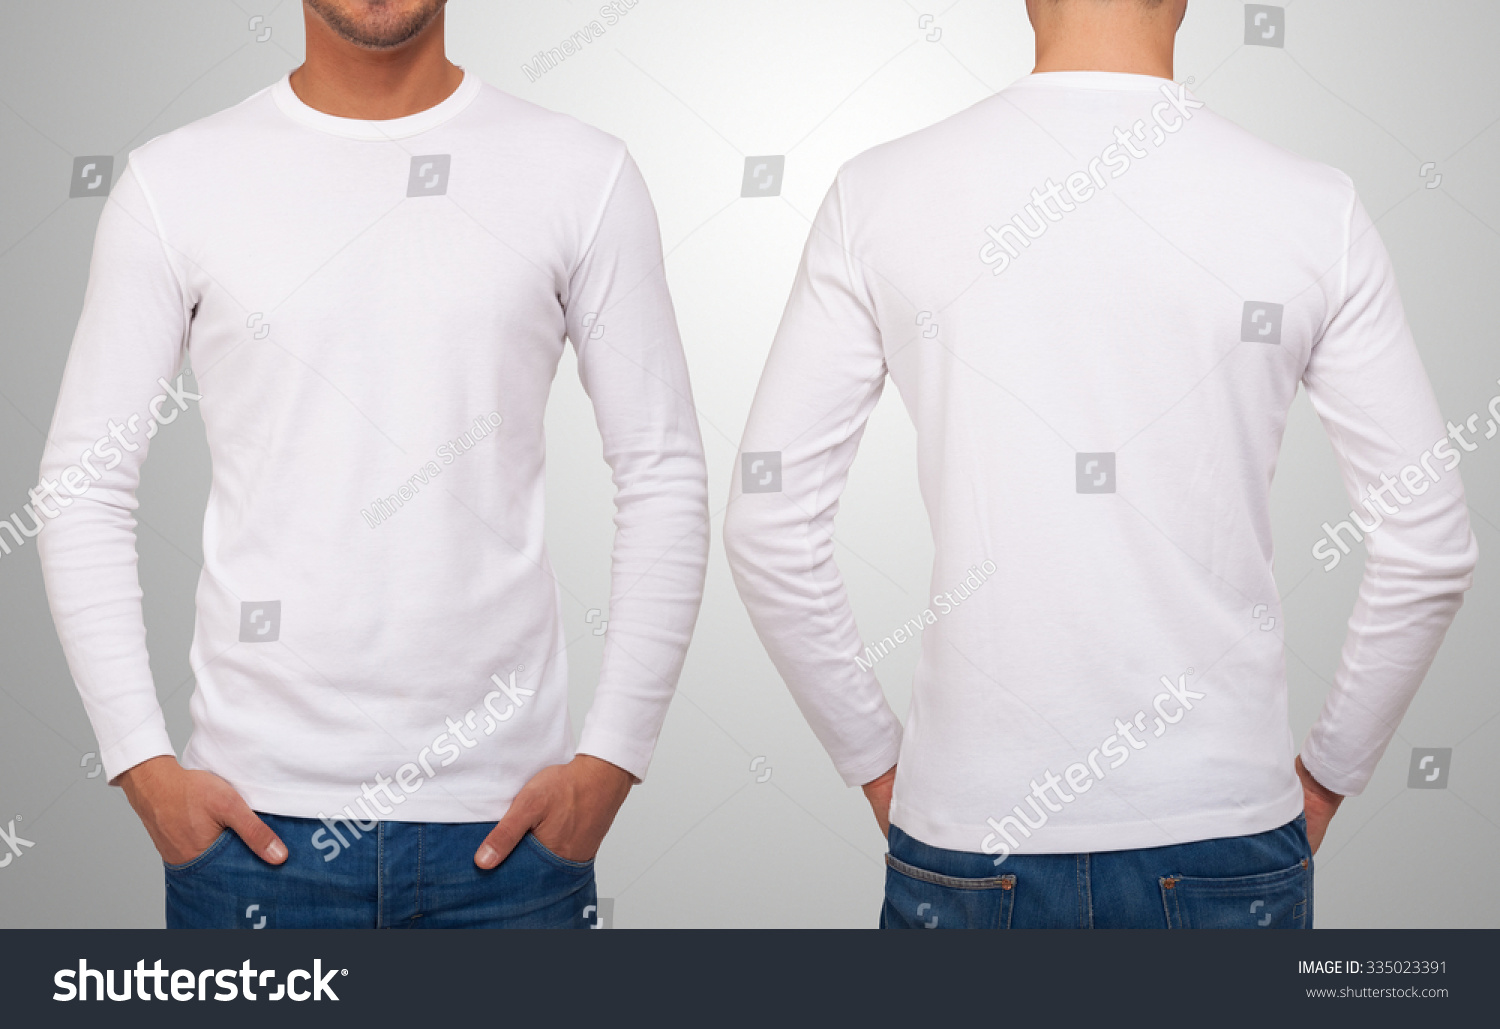 Man Wearing A White T-Shirt With Long Sleeves. Front And Back Version ...